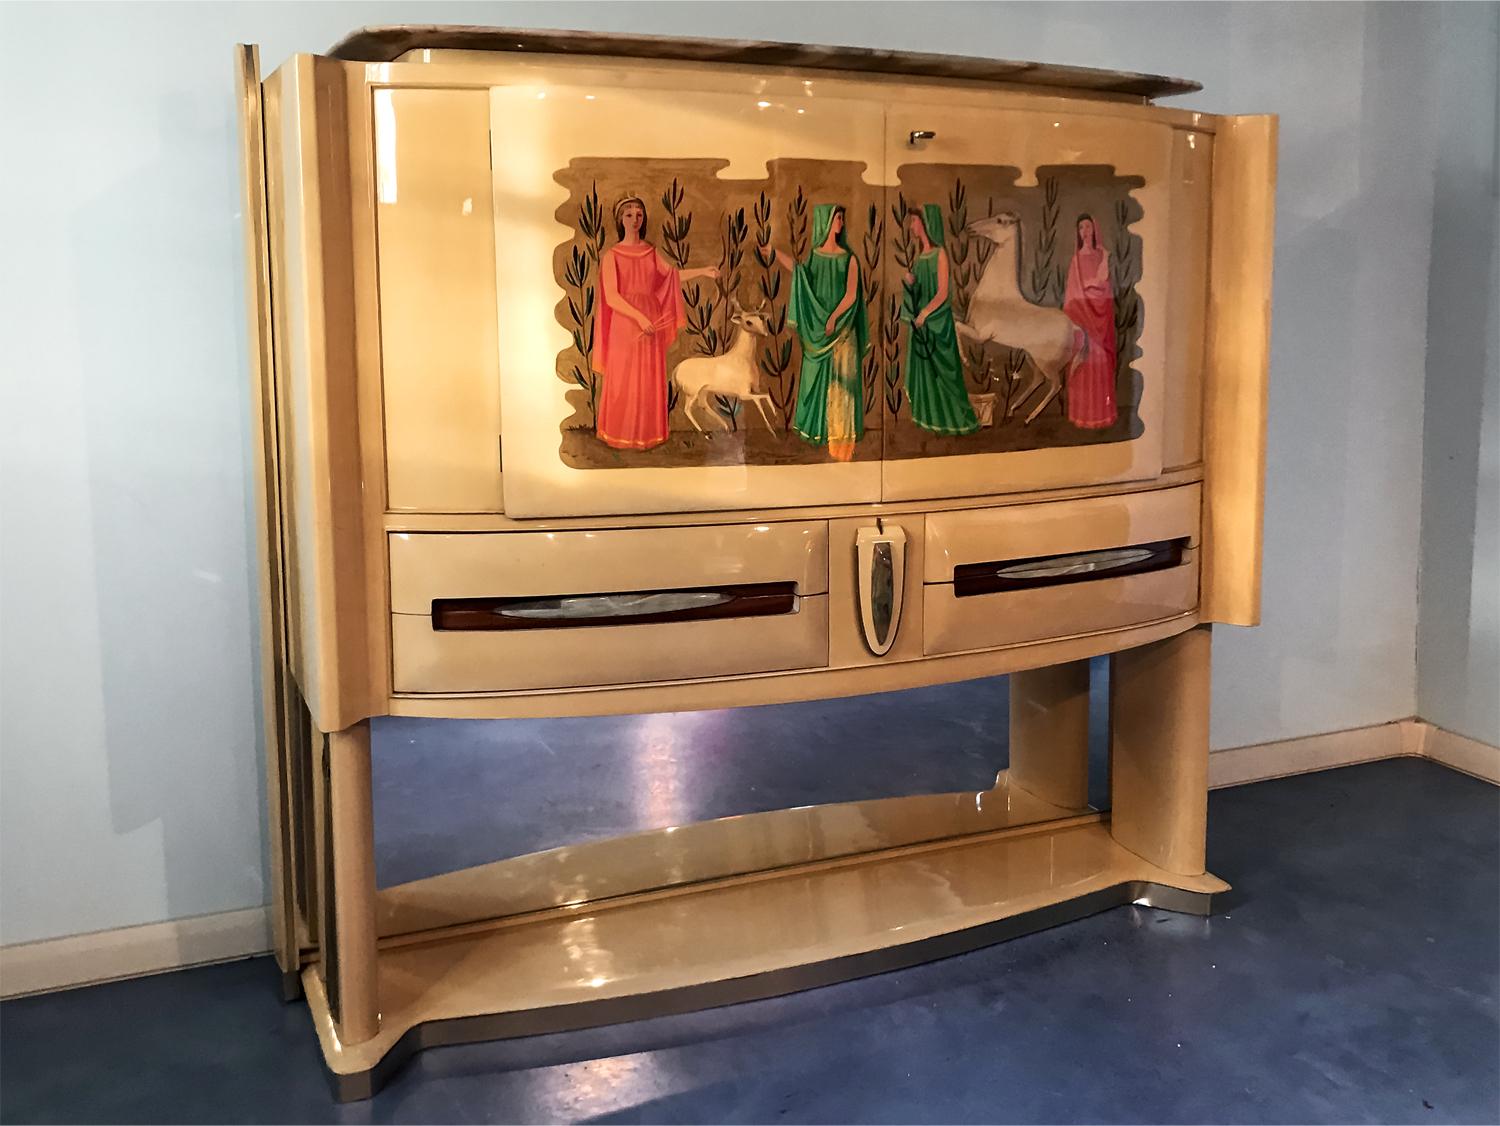 This bar cabinet is in very good conditions of the period as the images show, and is one of the masterpieces of Vittorio Dassi.
It's entirely finished in parchment and enriched frontally by a painting in the style typical of 20th century Italian